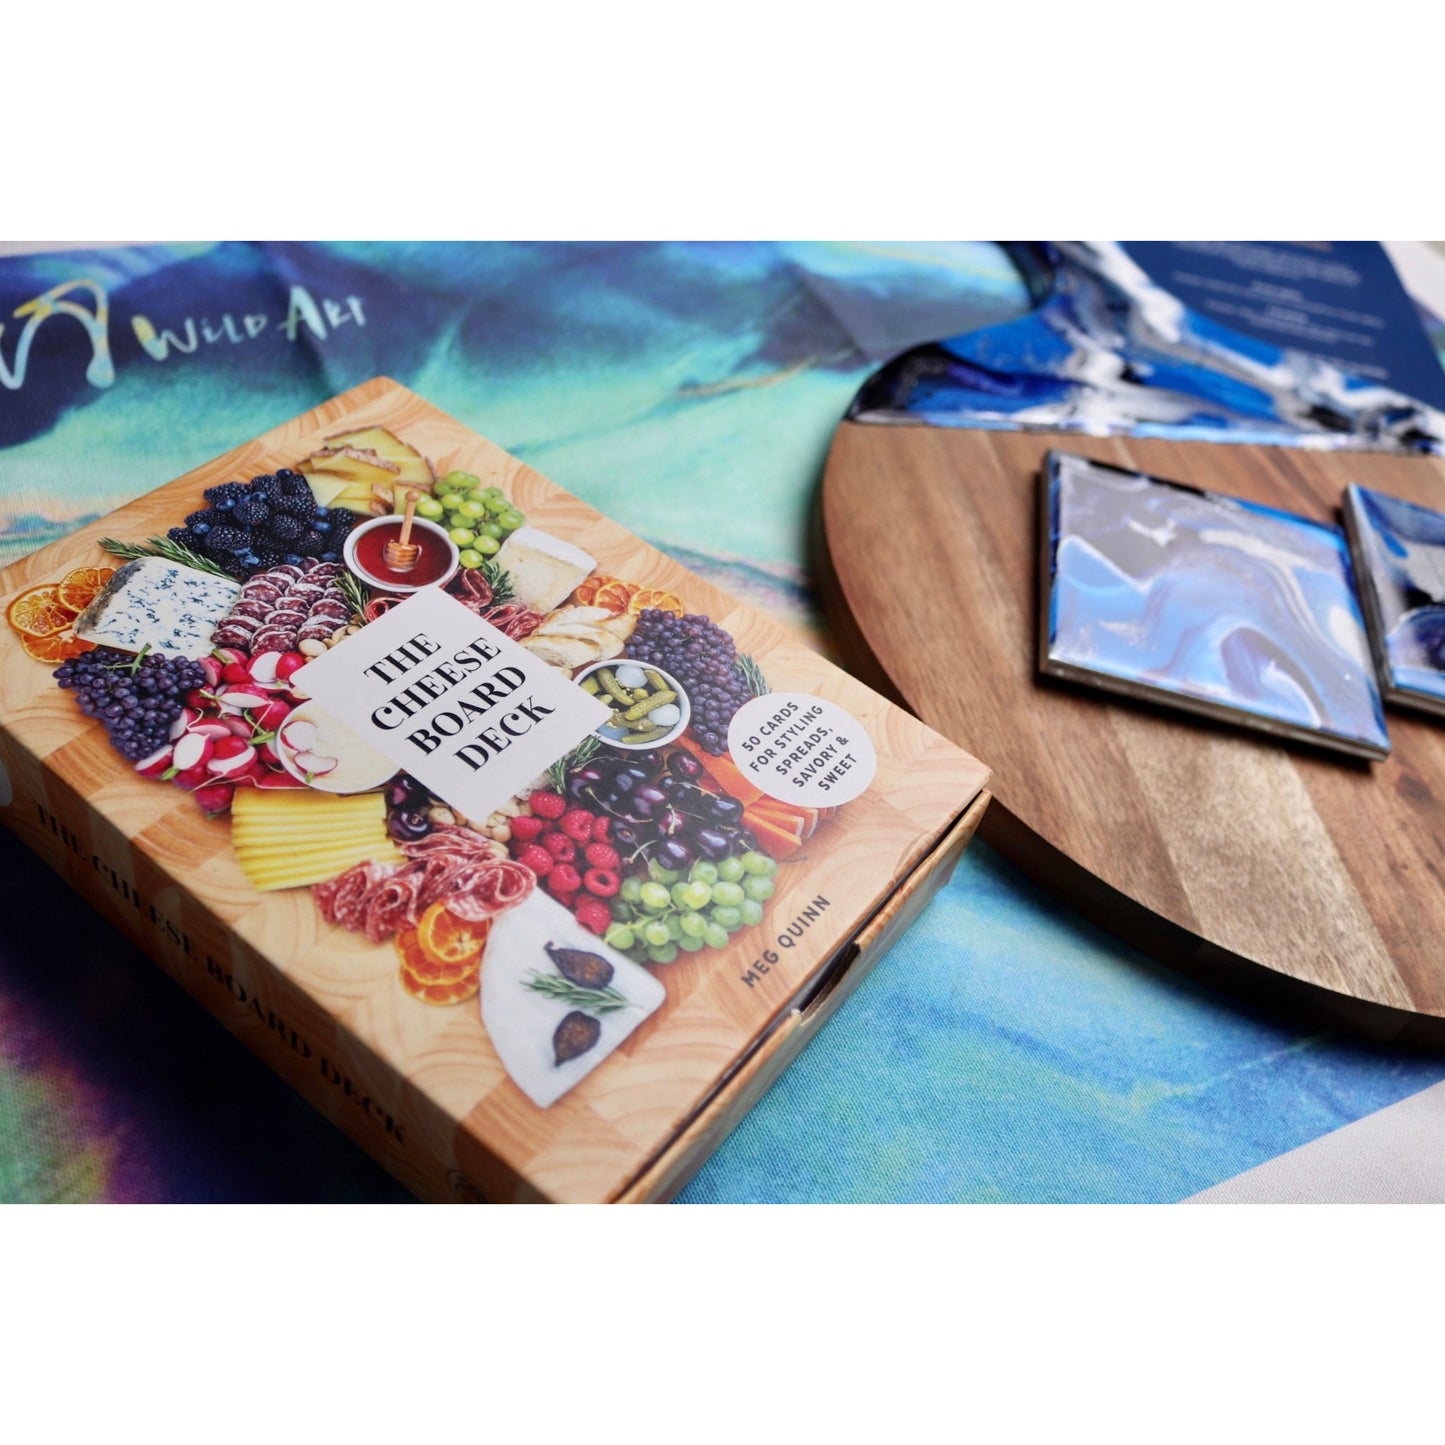 The Cheese Lover Gift Box